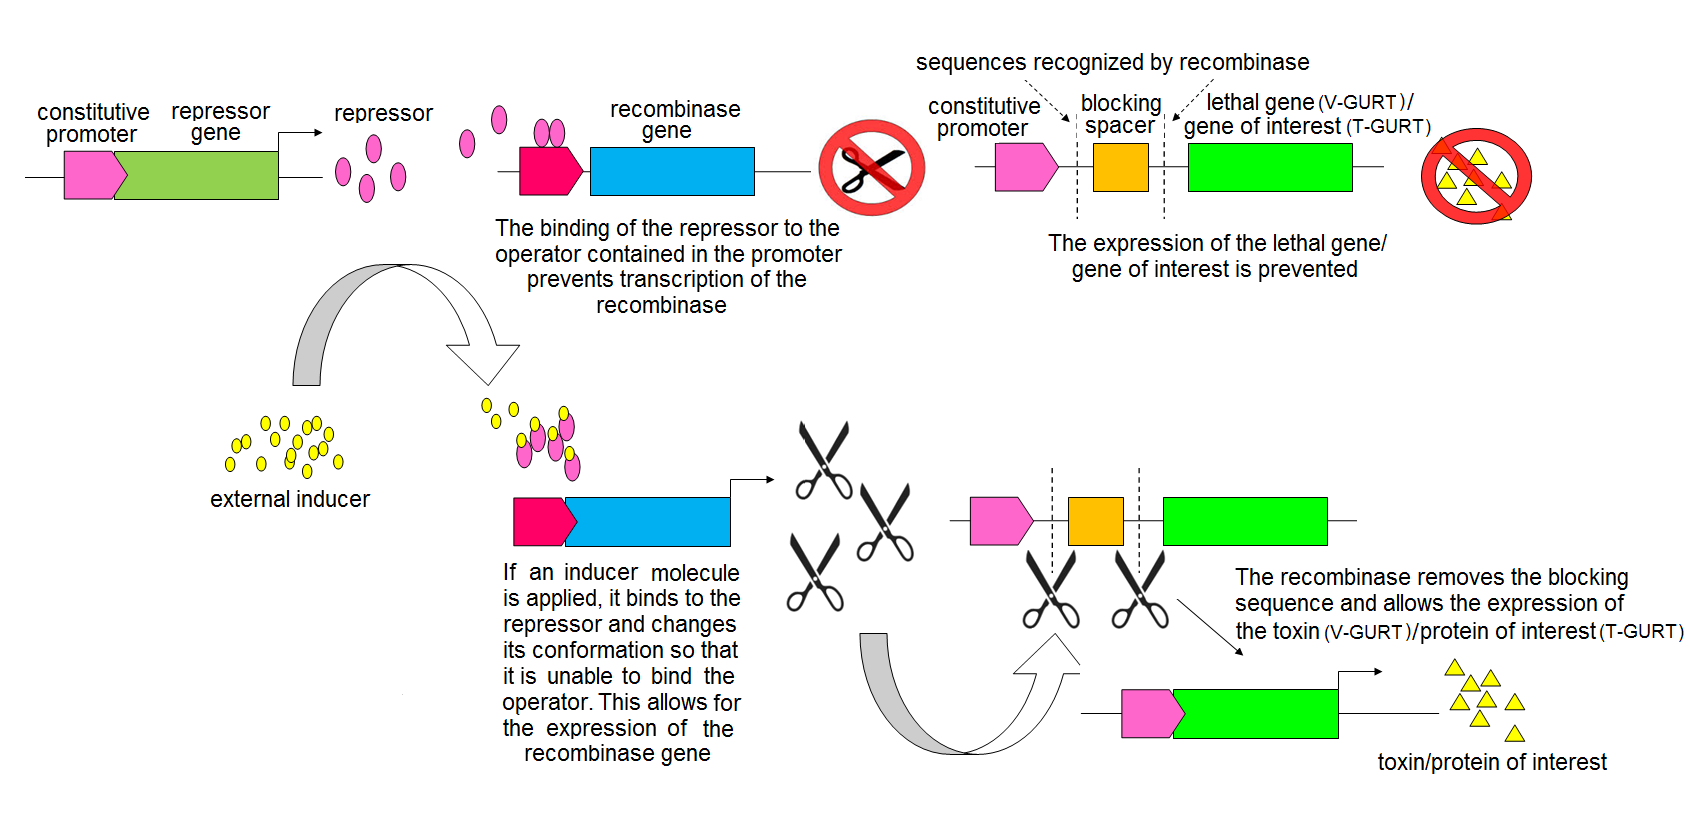 Figure 1. Schematic representation of the mechanism of GURTs. In a variant of this scheme, the repressor proteins are normally unable to bind to the pertinent DNA and the inducer is applied to bind the repressor that undergoes a change in its conformation so that it can bind to the DNA and activate transcription.